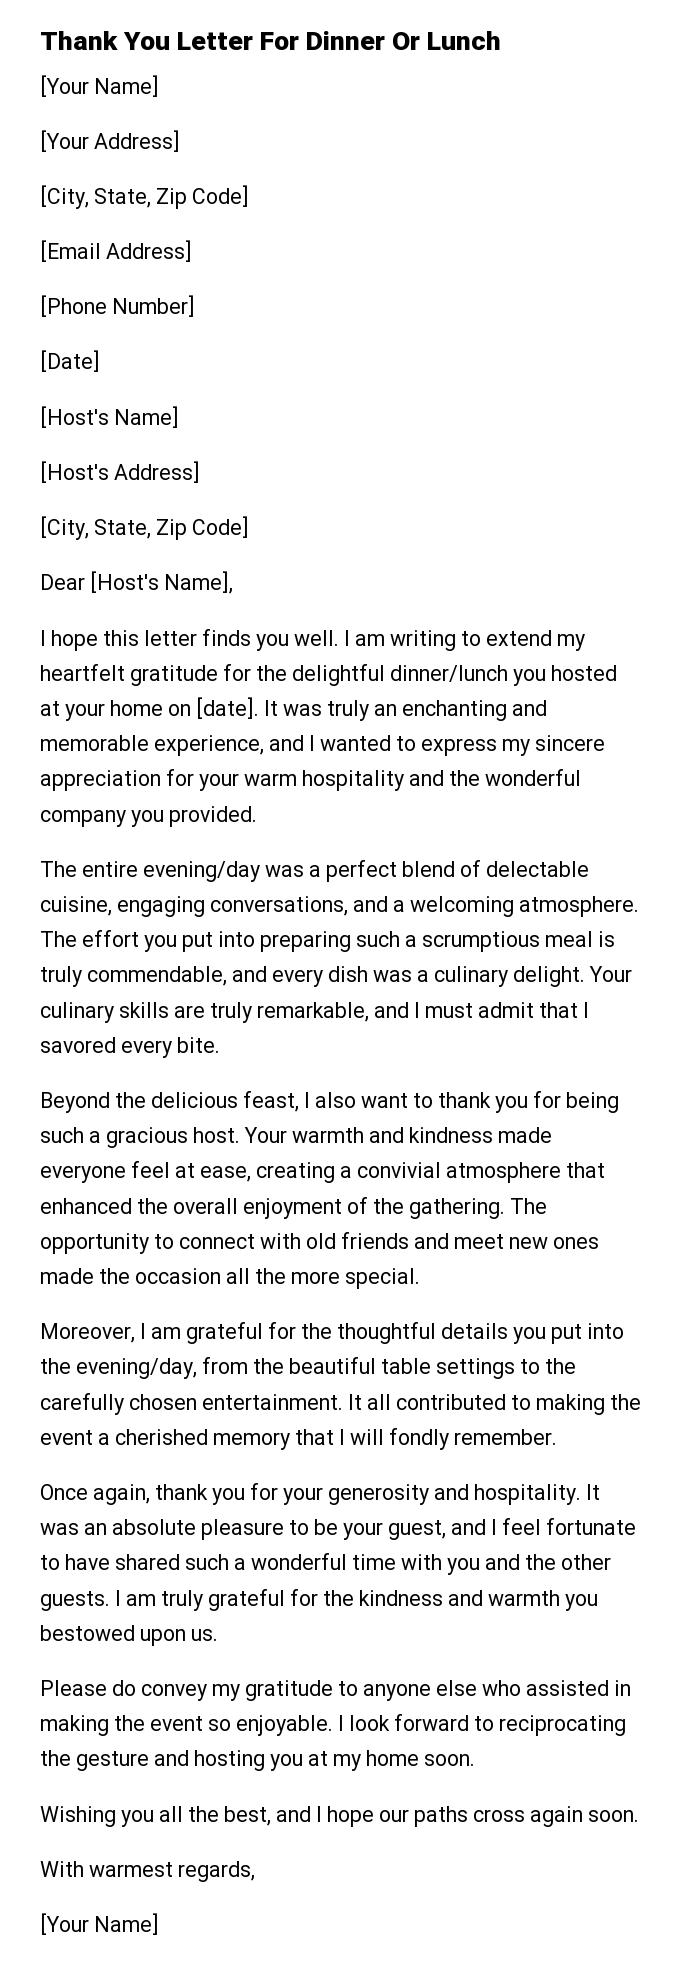 Thank You Letter For Dinner Or Lunch